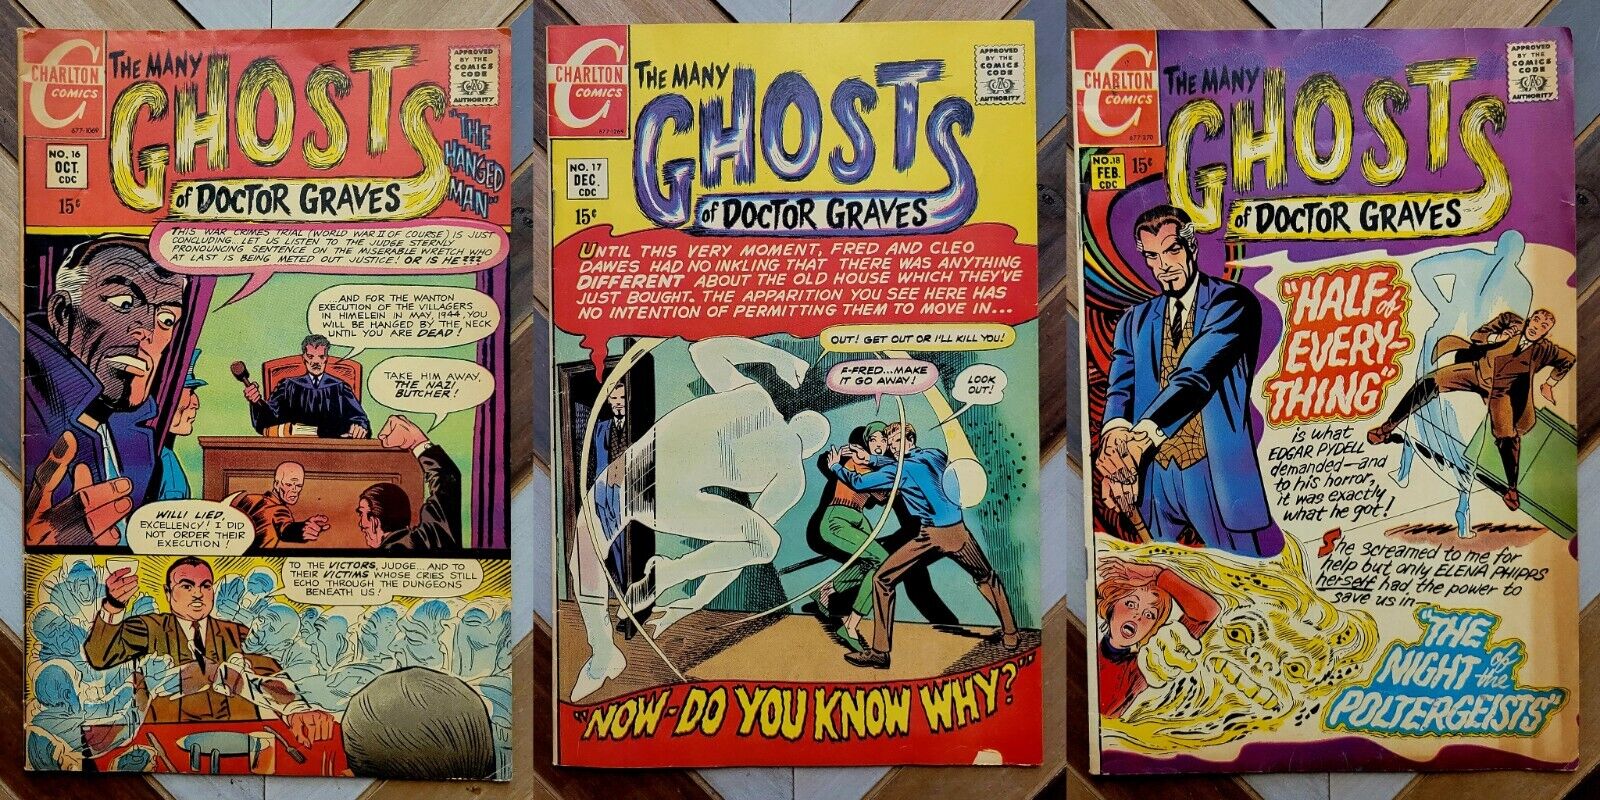 MANY GHOSTS OF DR GRAVES #16, 17, 18 (Charlton 1969) STEVE DITKO Covers HORROR